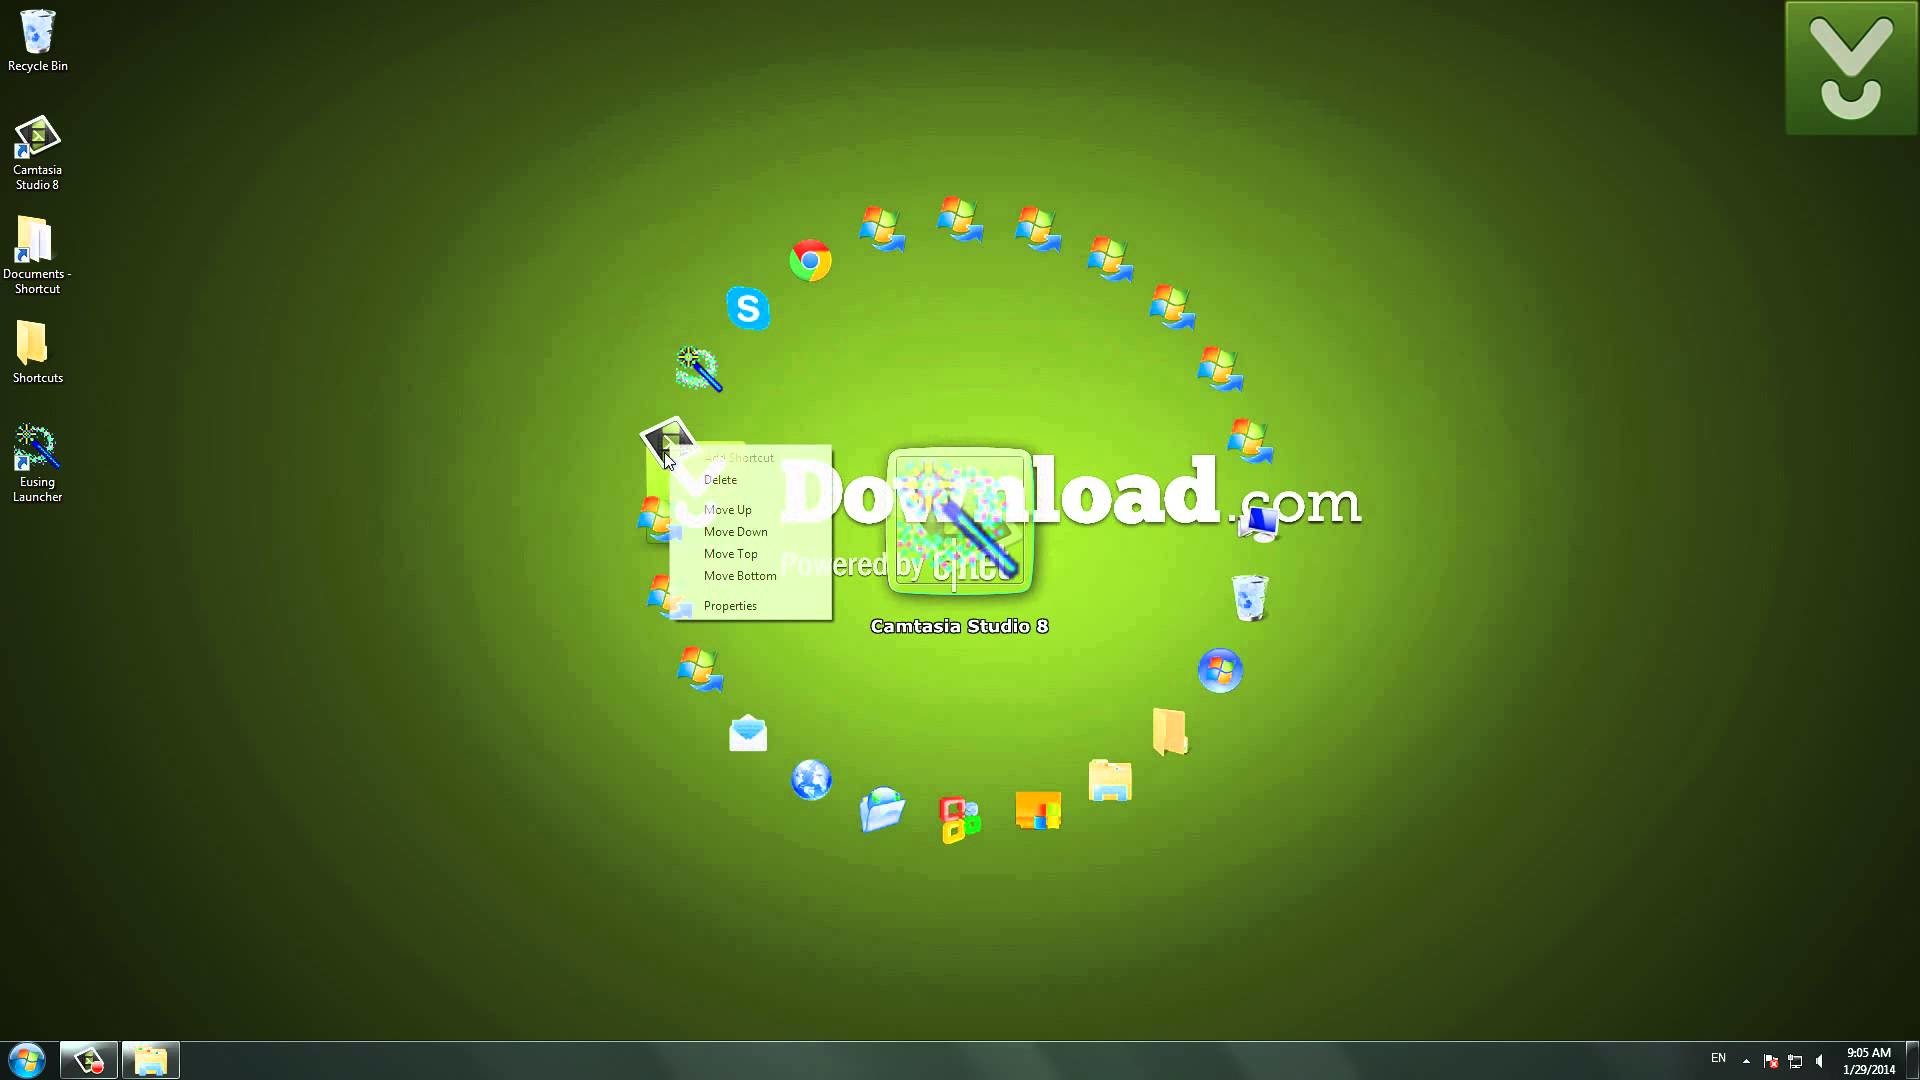 1920x1080 Eusing Launcher - Organize icons on your desktop in a creative way -  Download Video Previews - YouTube